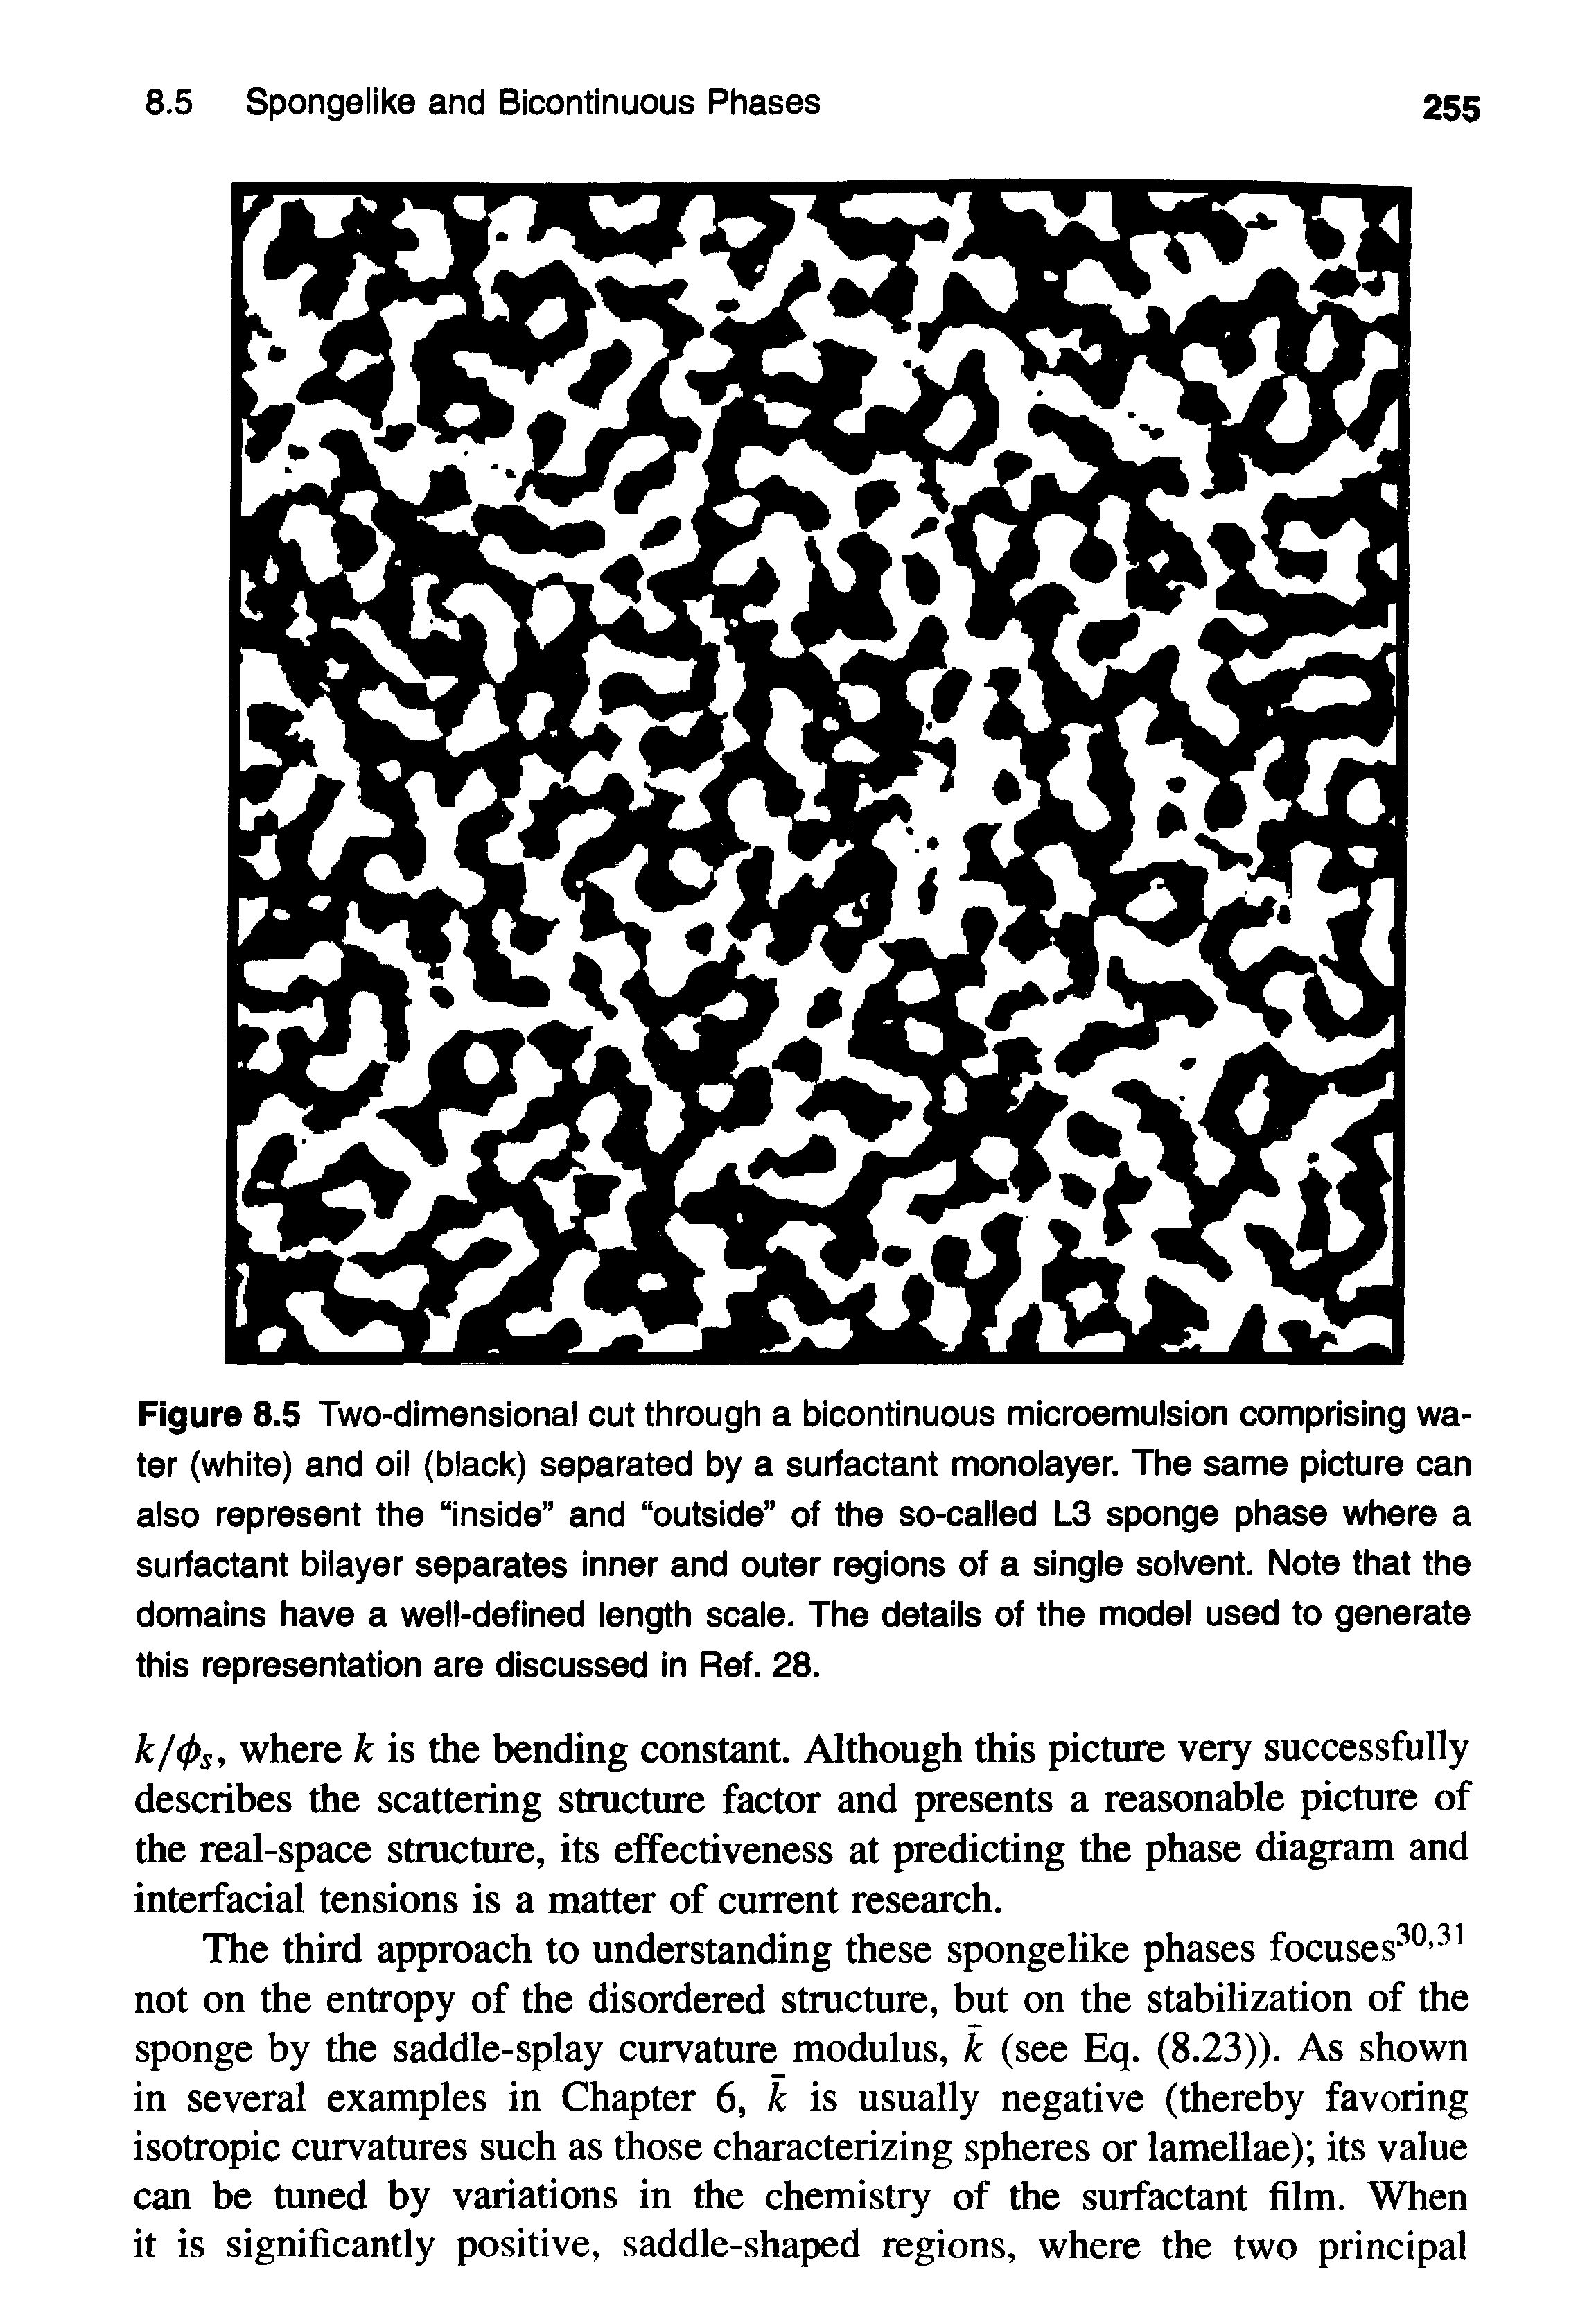 Figure 8.5 Two-dimensional cut through a bicontinuous microemulsion comprising water (white) and oil (black) separated by a surfactant monolayer. The same picture can also represent the inside and outside of the so-called L3 sponge phase where a surfactant bilayer separates inner and outer regions of a single solvent. Note that the domains have a well-defined iength scaie. The detaiis of the model used to generate this representation are discussed in Ref. 28.